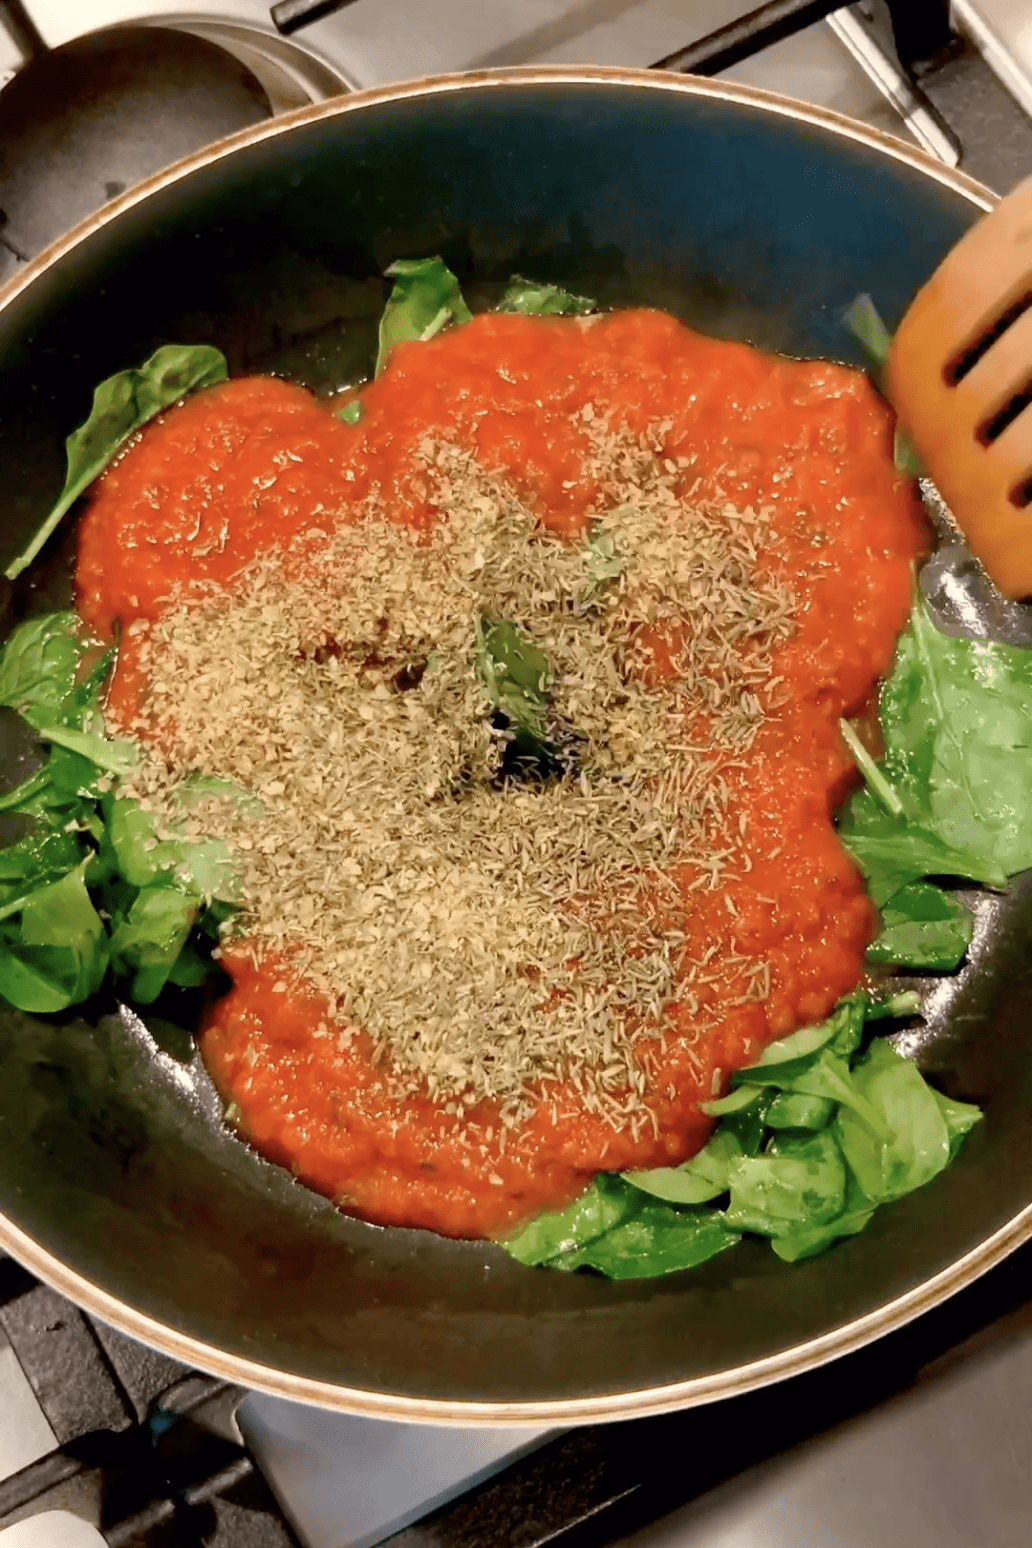 Tomato sauce and spices added to spinach on a pan.